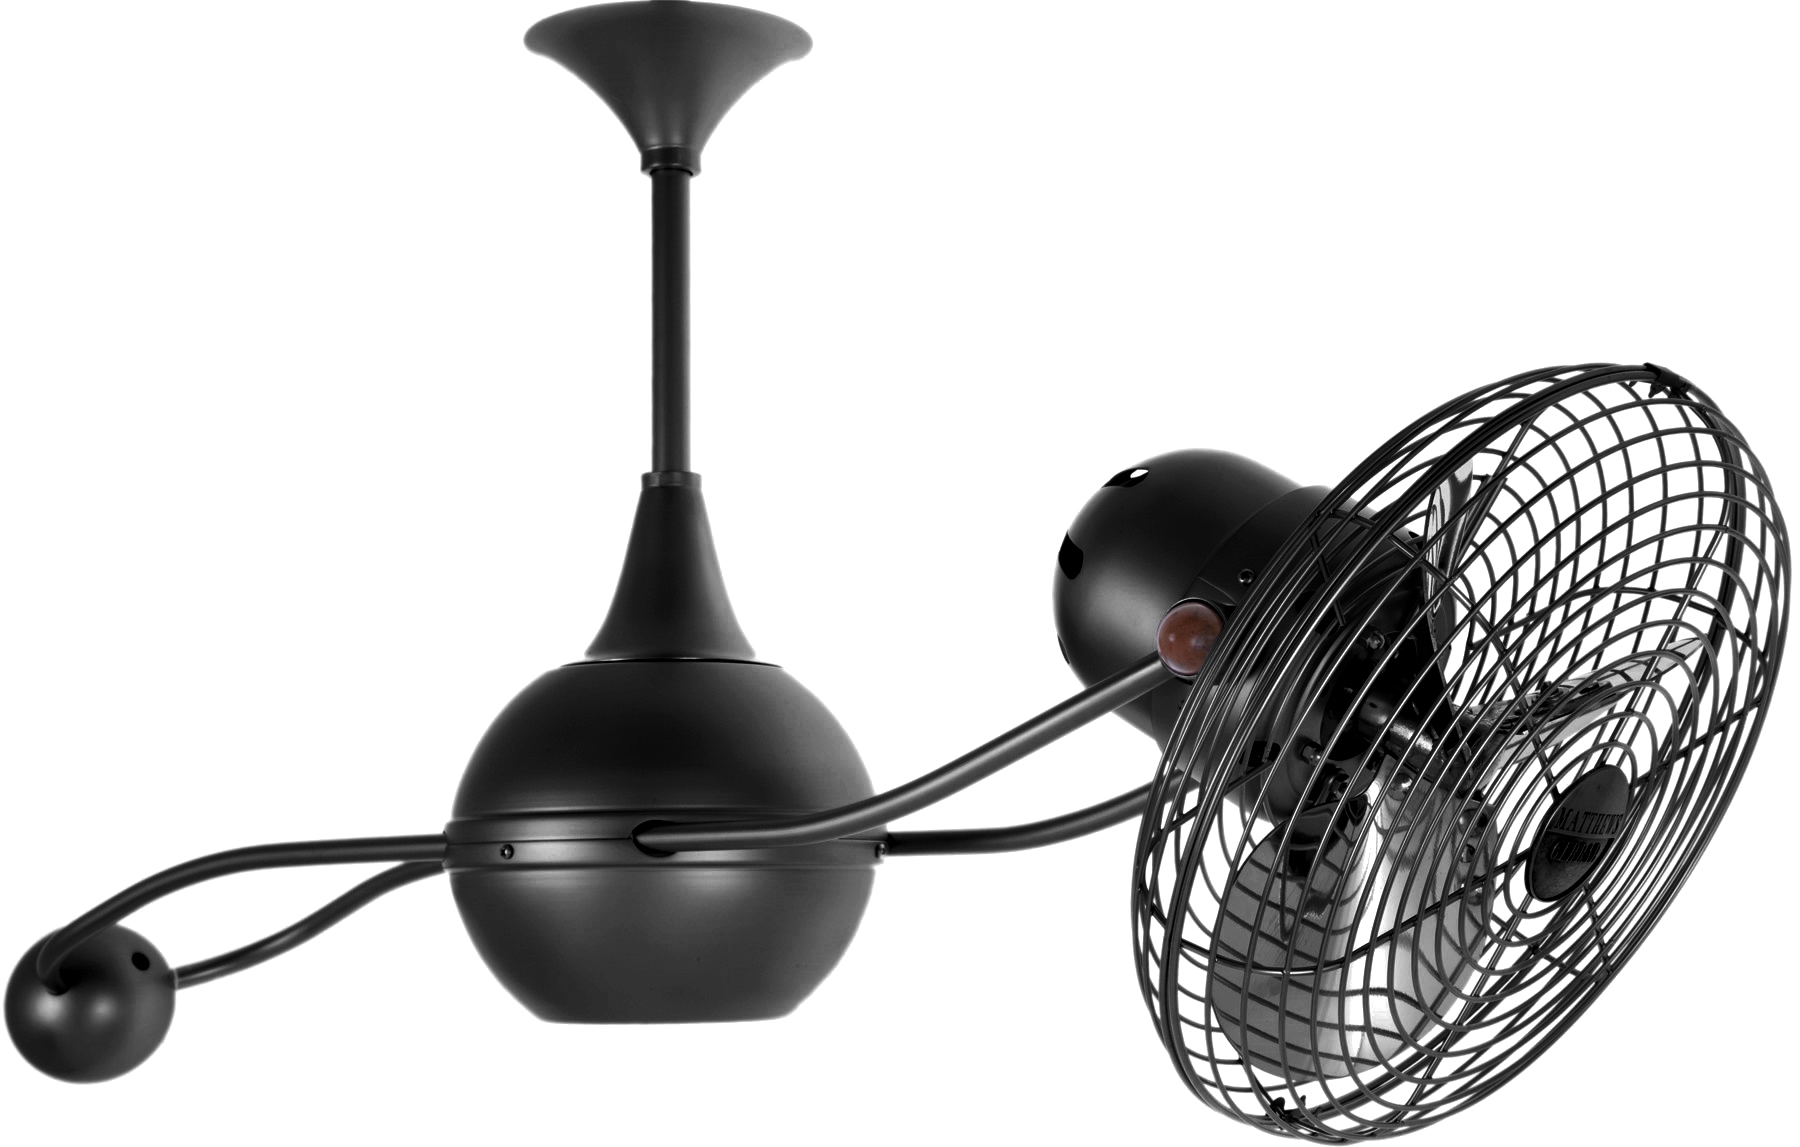 Brisa 2000 ceiling fan in Black finish with Metal Blades made by